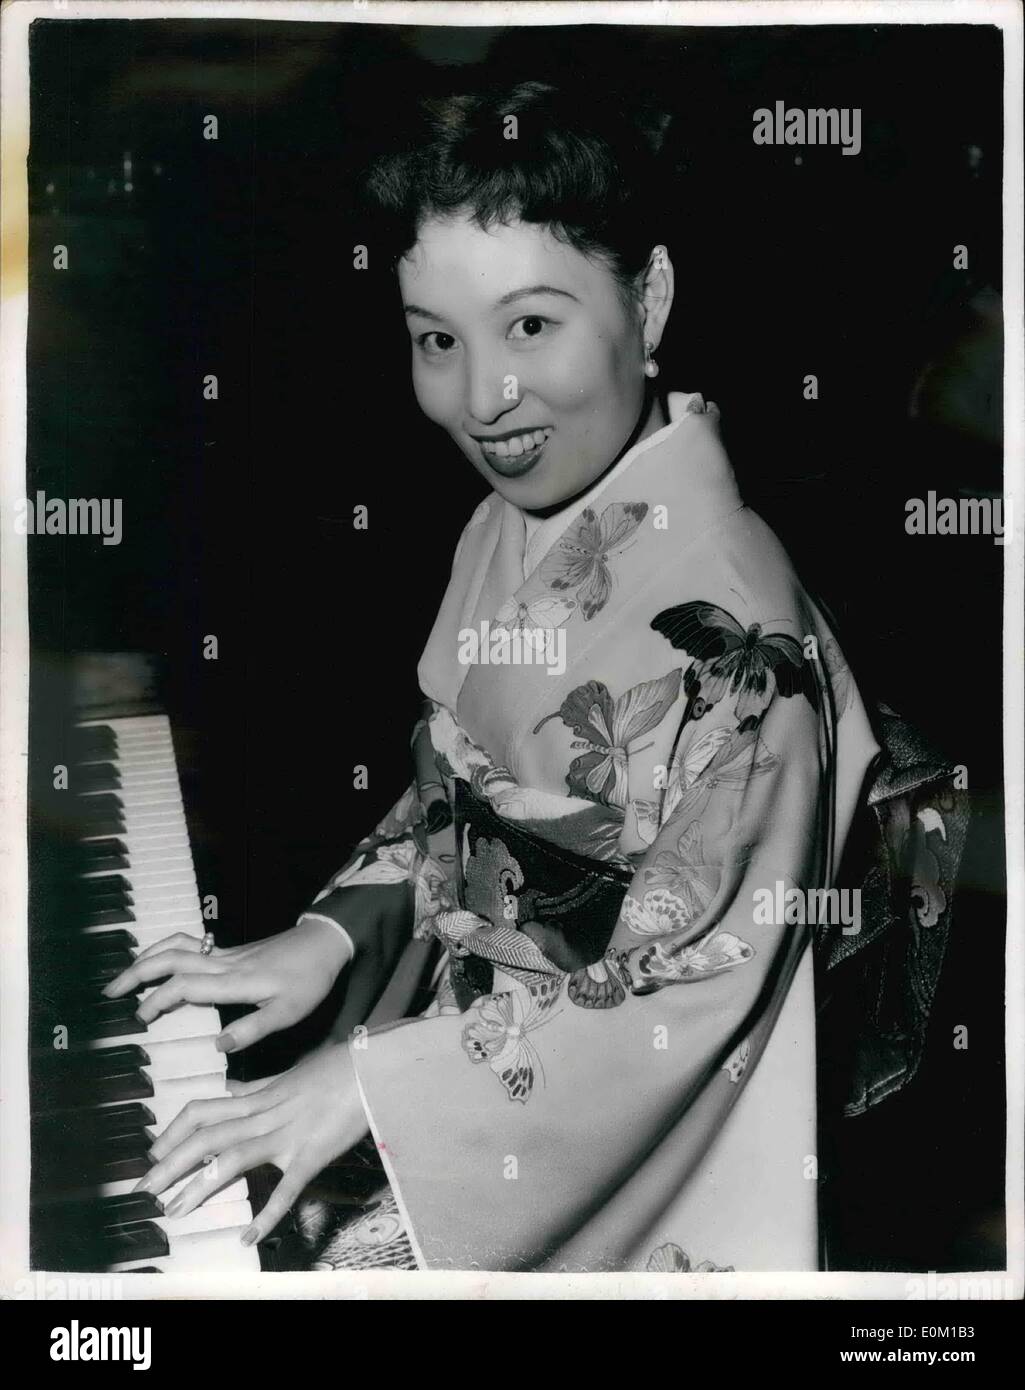 Mar. 03, 1953 - A Japanese Butterfly Makes B.B.C. Recording For Japanese Service: A madam Butterfly who really is Japanese has arrived in London. She is Michiko Sunahara from Tokio. She has been singing the role of Cho-Cho-San in Madam Butterfly for the past 18 months at the Opera Comique in Paris. Miss sunshare, at 28, one of Japan's leading sopranos, sings Madam Butterfly in Japanese and speaks little English. But her French is perfect. This evening she made a B.B.C. recording for the Japanese service. Photo shows Miss Sunahara pictured during her recording this evening. Stock Photo